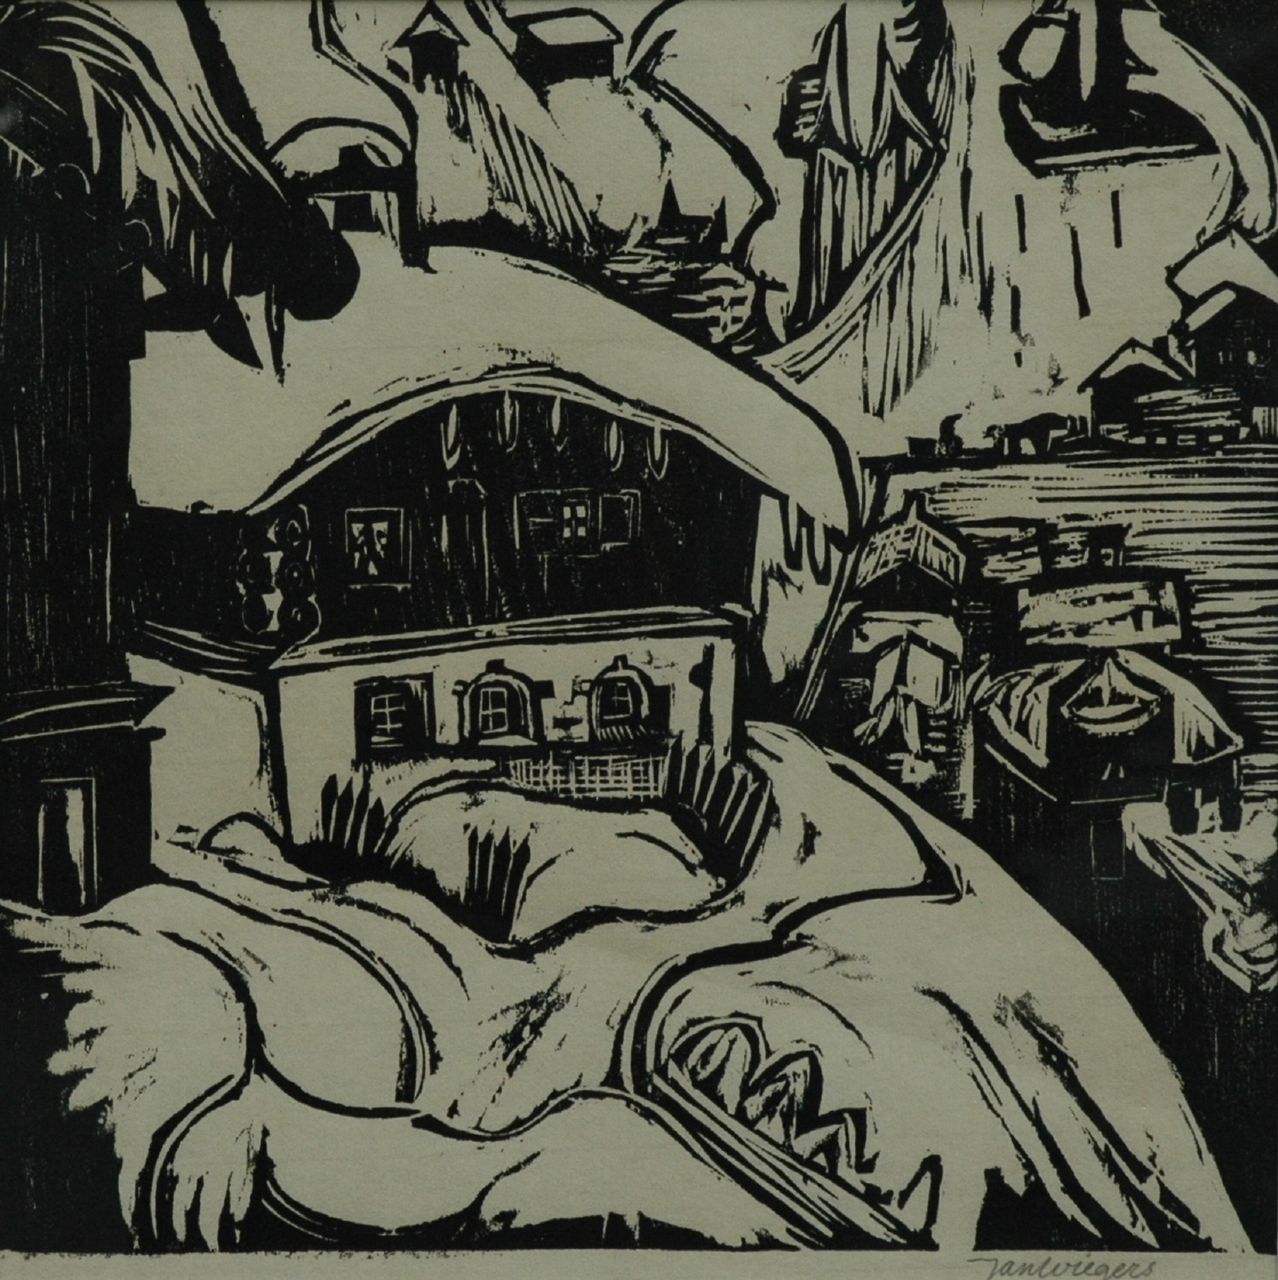 Wiegers J.  | Jan Wiegers, The house of Ernst Ludwig Kirchner, Davos, Holzstich auf Papier 29,5 x 29,5 cm, signed l.r. in pencil